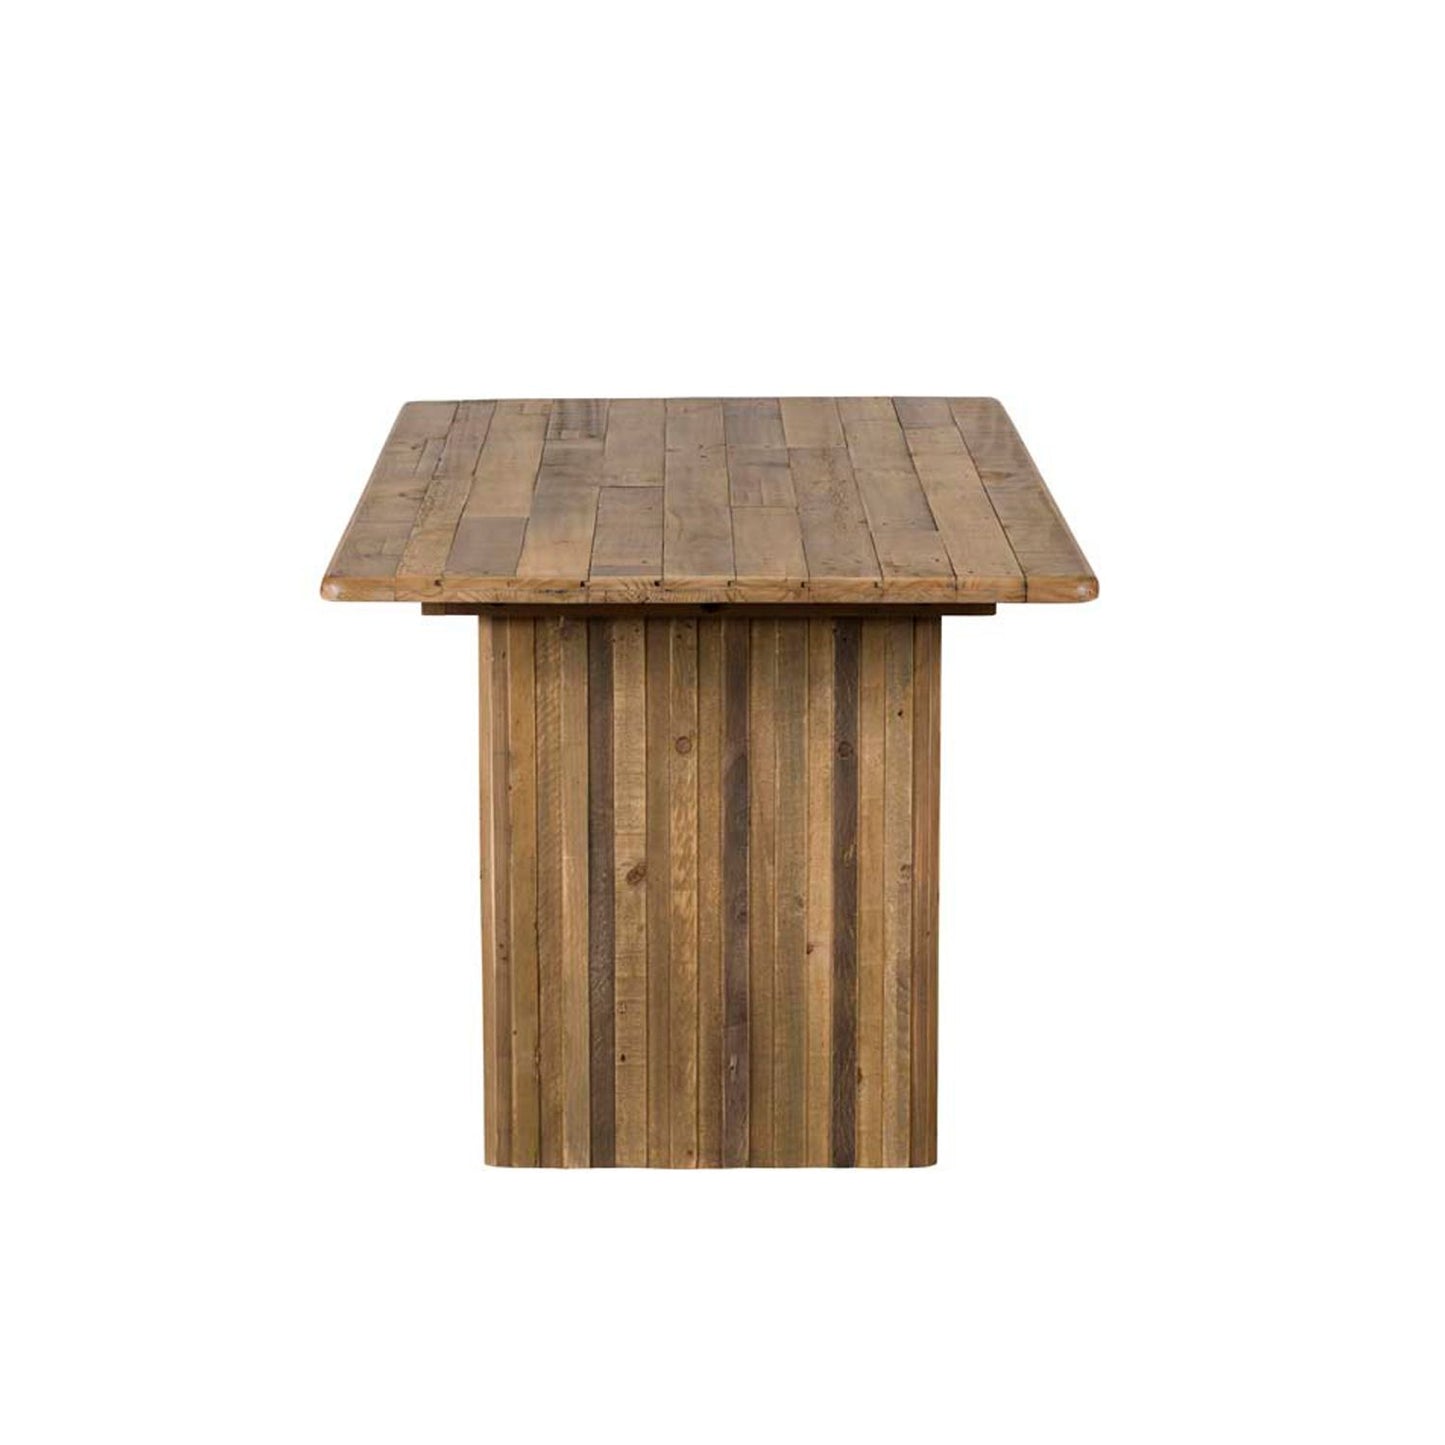 160cm Dining Table